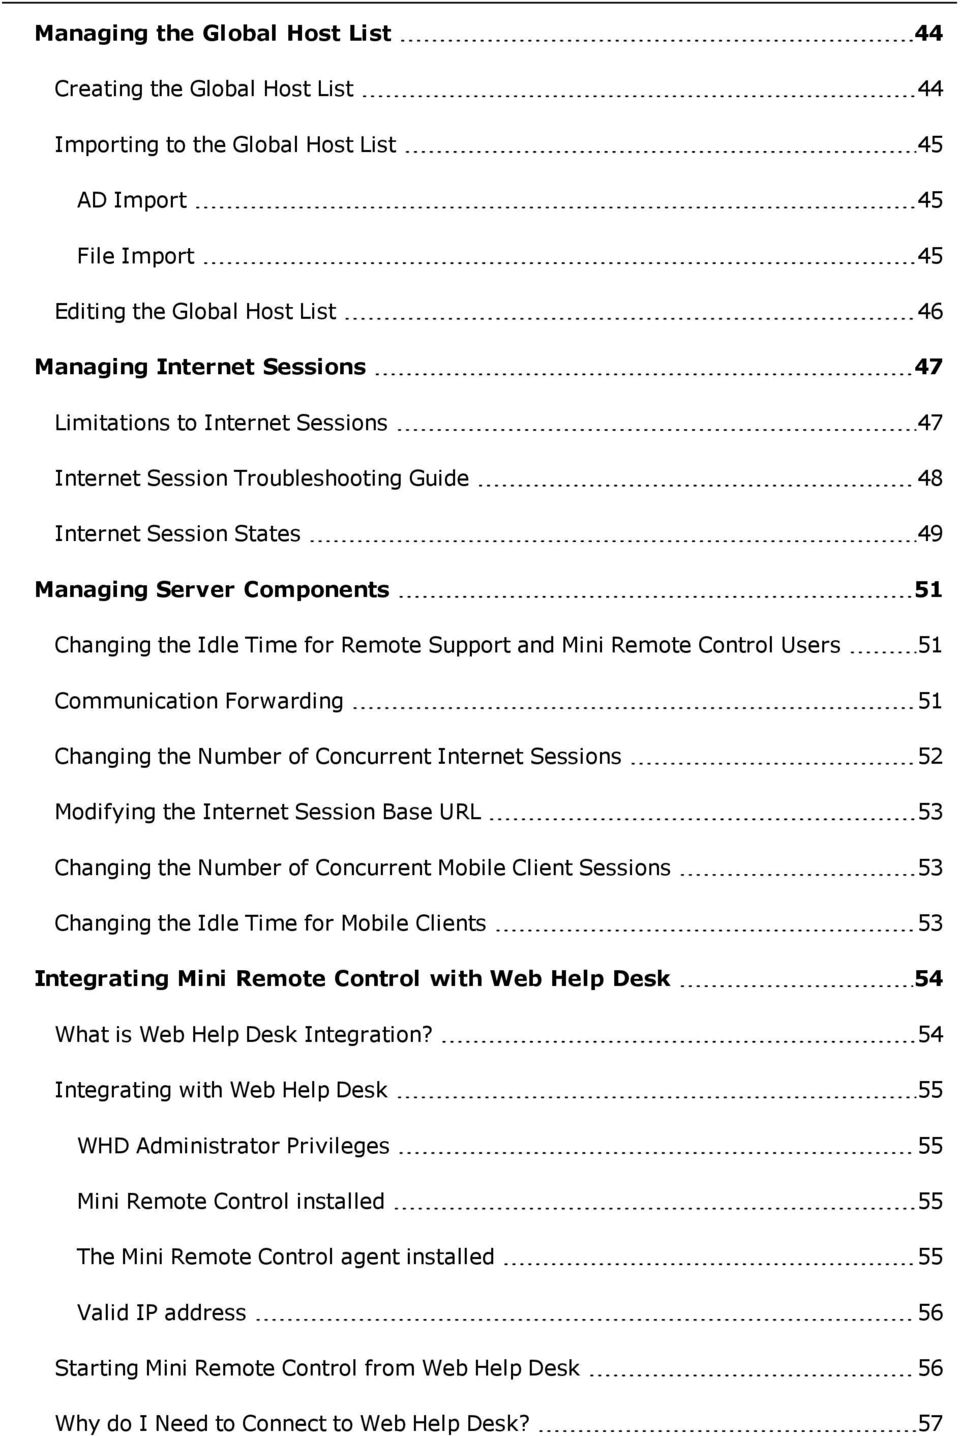 Control Users 51 Communication Forwarding 51 Changing the Number of Concurrent Internet Sessions 52 Modifying the Internet Session Base URL 53 Changing the Number of Concurrent Mobile Client Sessions